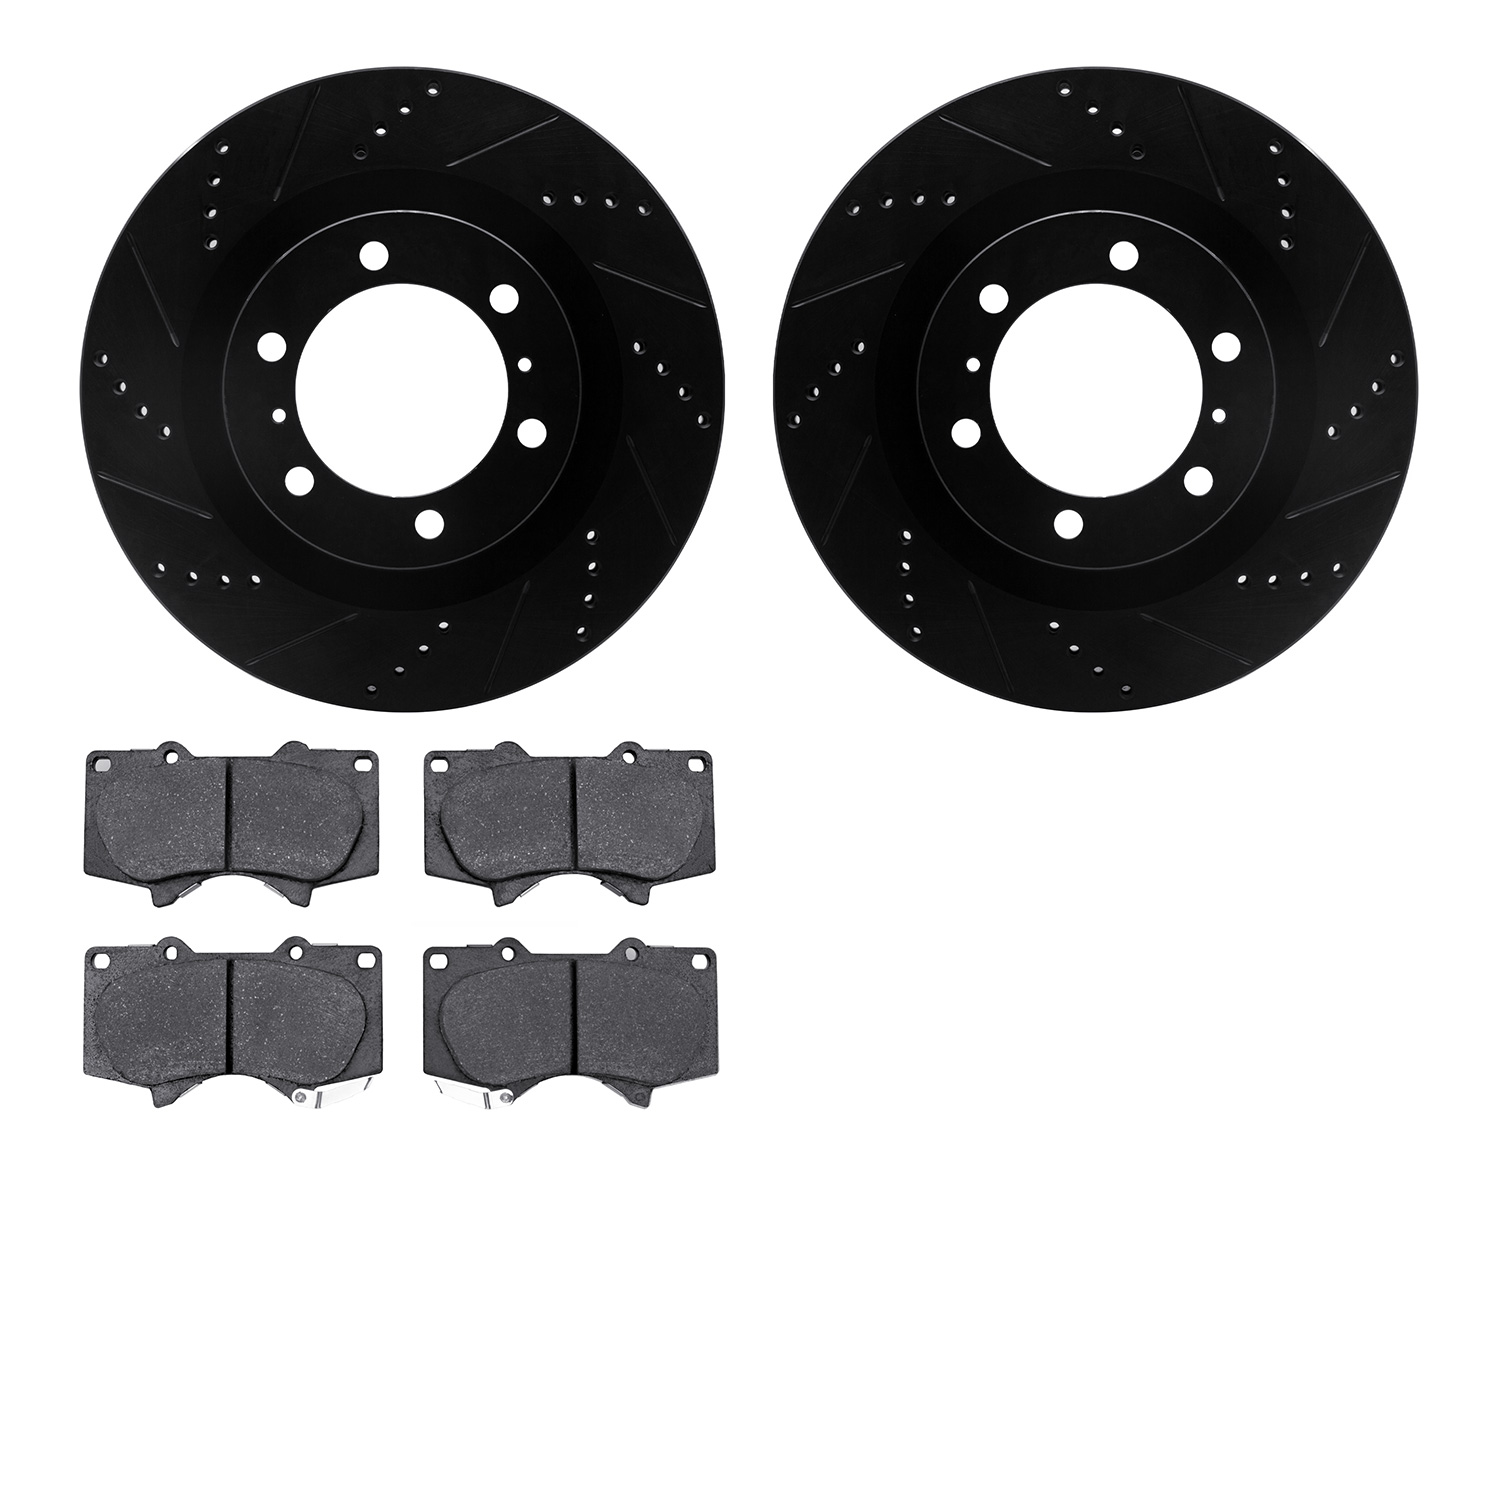 8302-76148 Drilled/Slotted Brake Rotors with 3000-Series Ceramic Brake Pads Kit [Black], Fits Select Lexus/Toyota/Scion, Positio